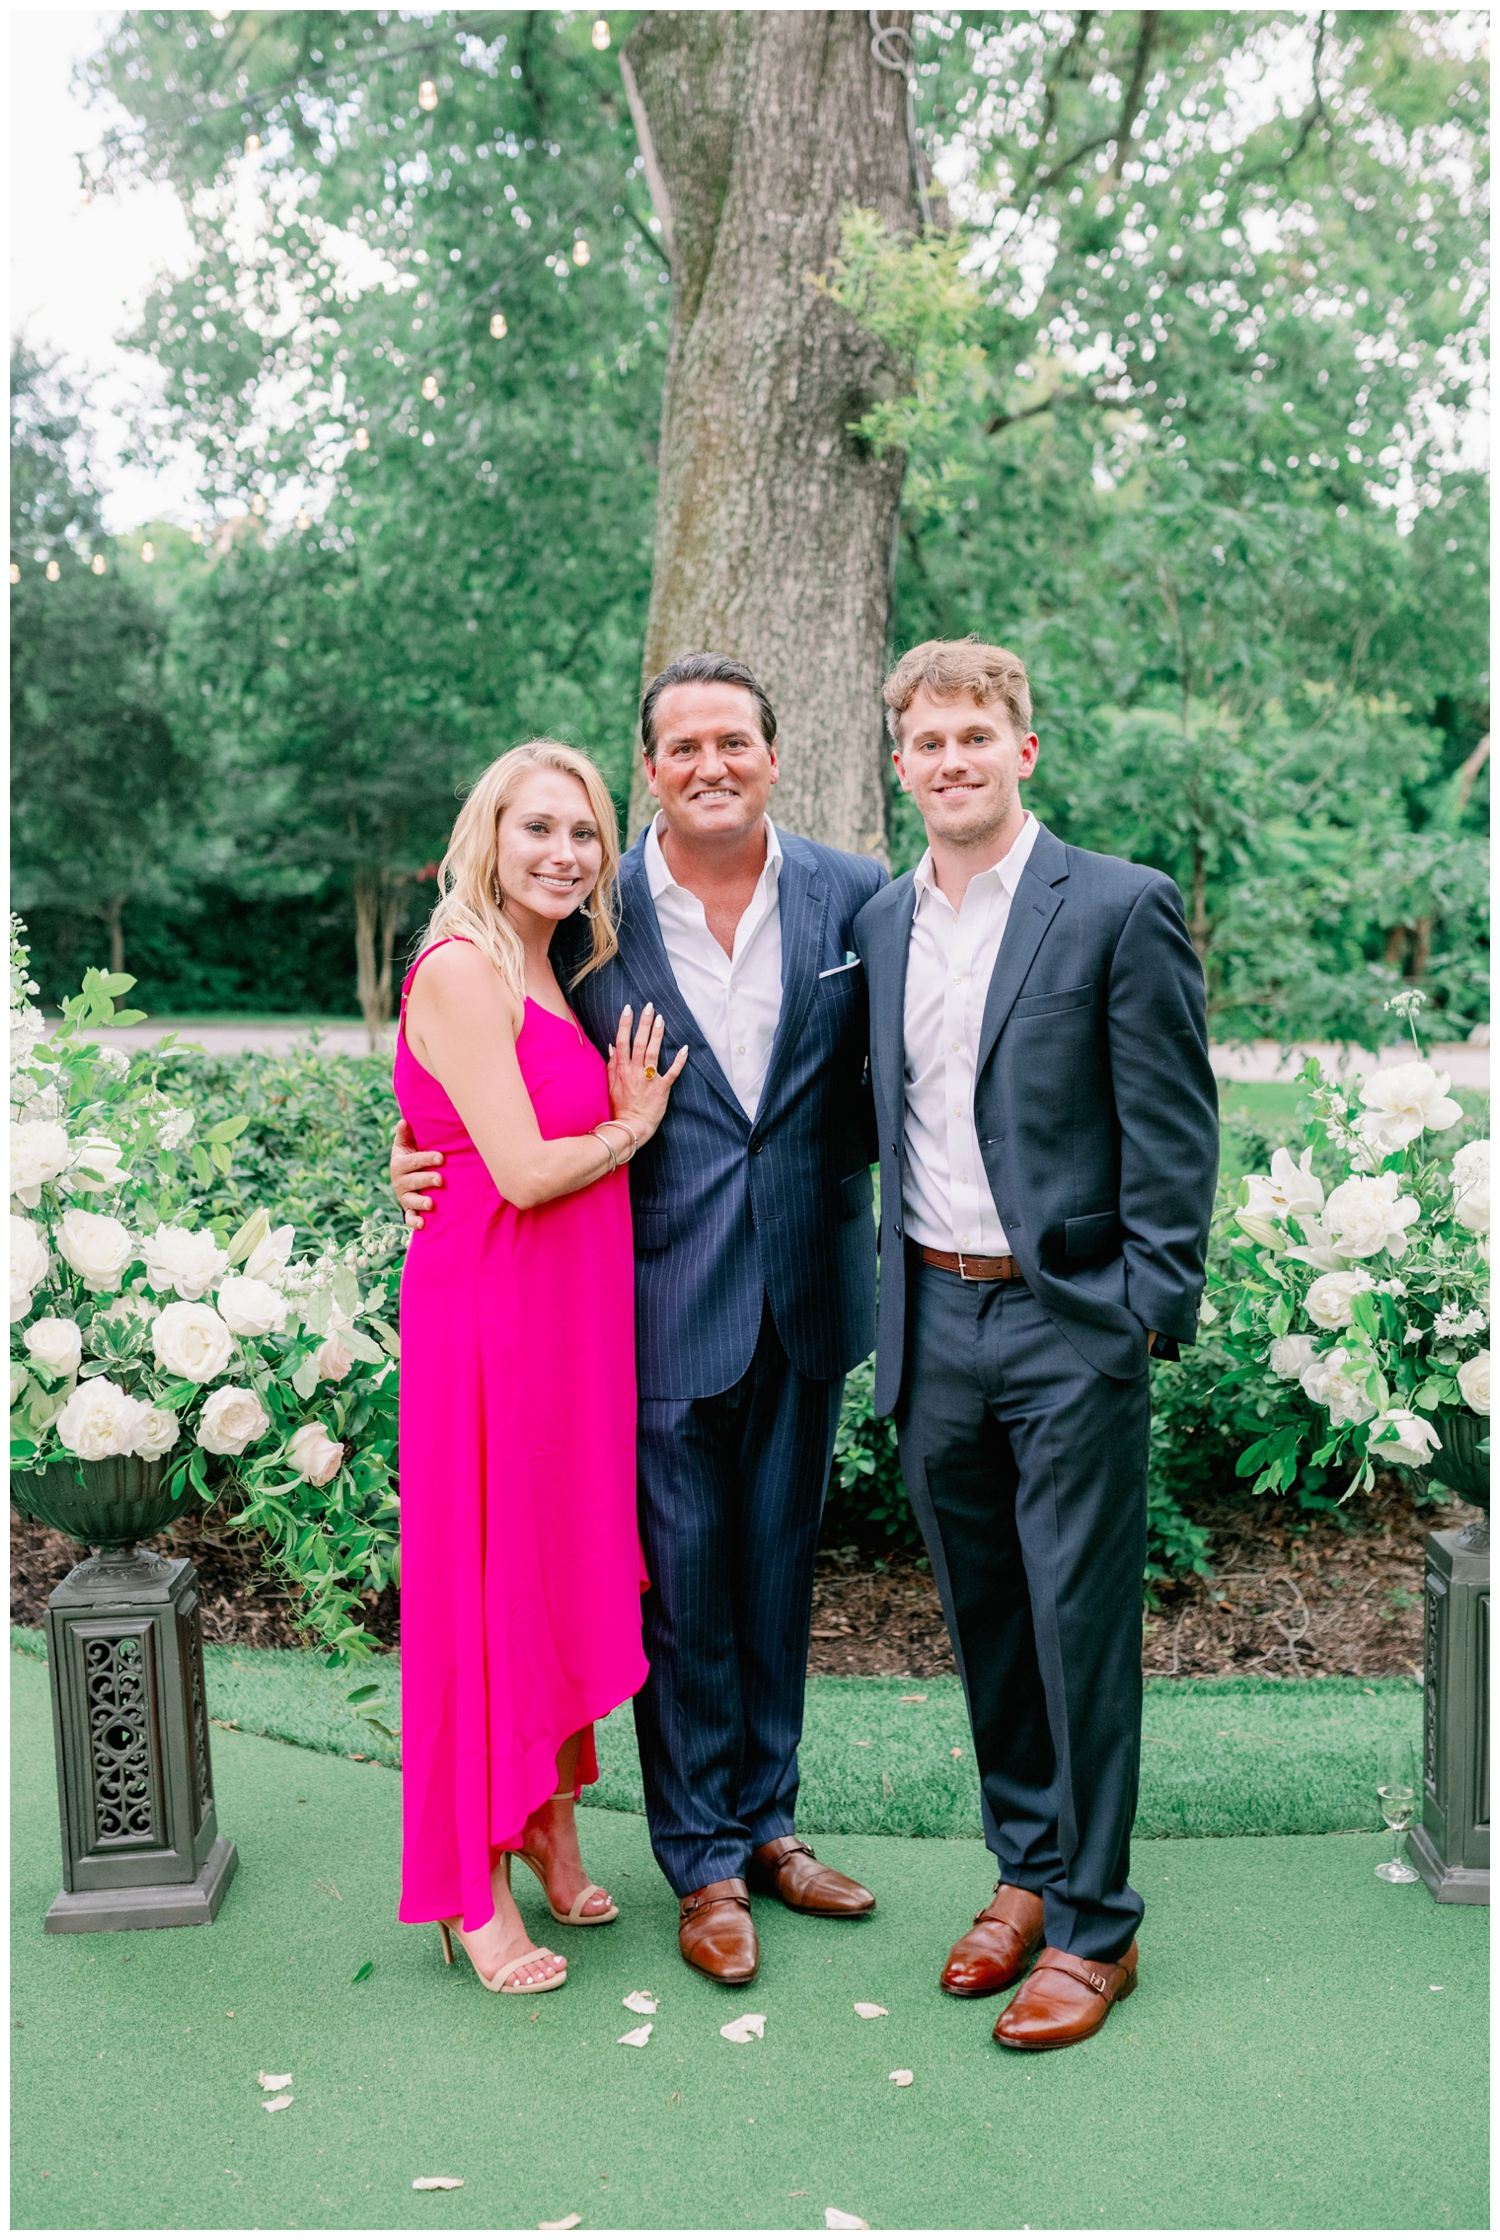 family portrait outside the Manor House The Houstonian Hotel wedding